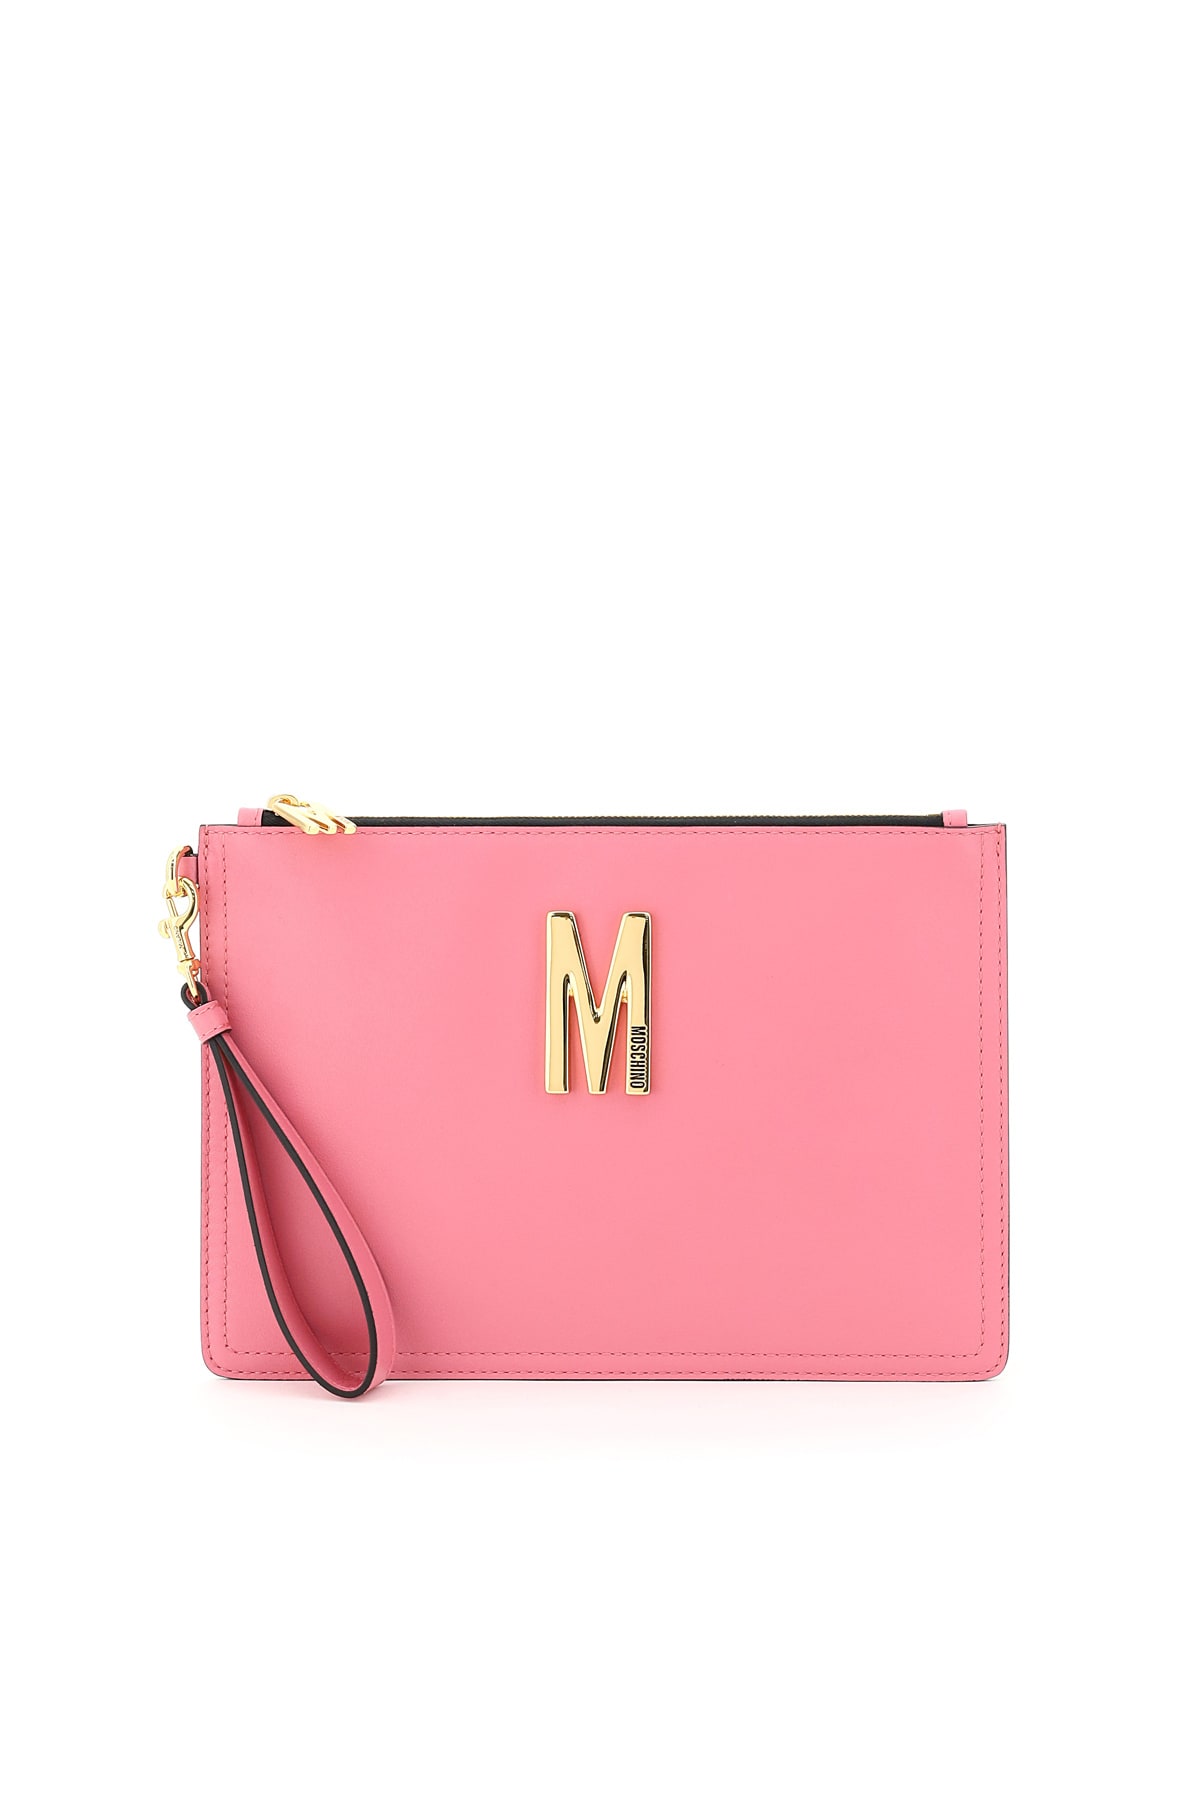 Moschino Leather Pouch With Monogram